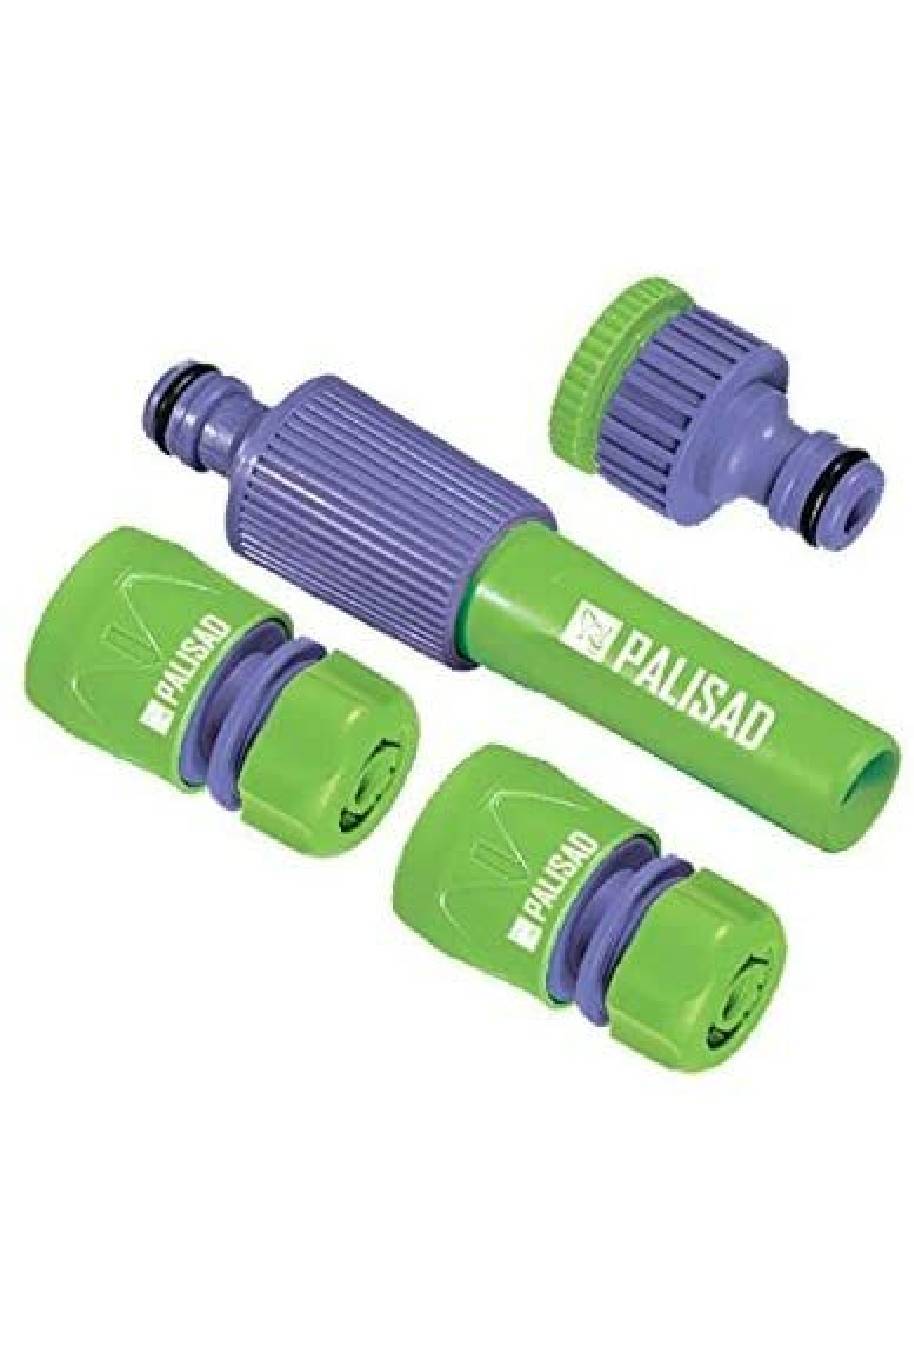 Palisad 1/2 Hose Connection Set With 3 Atomizer Adapters